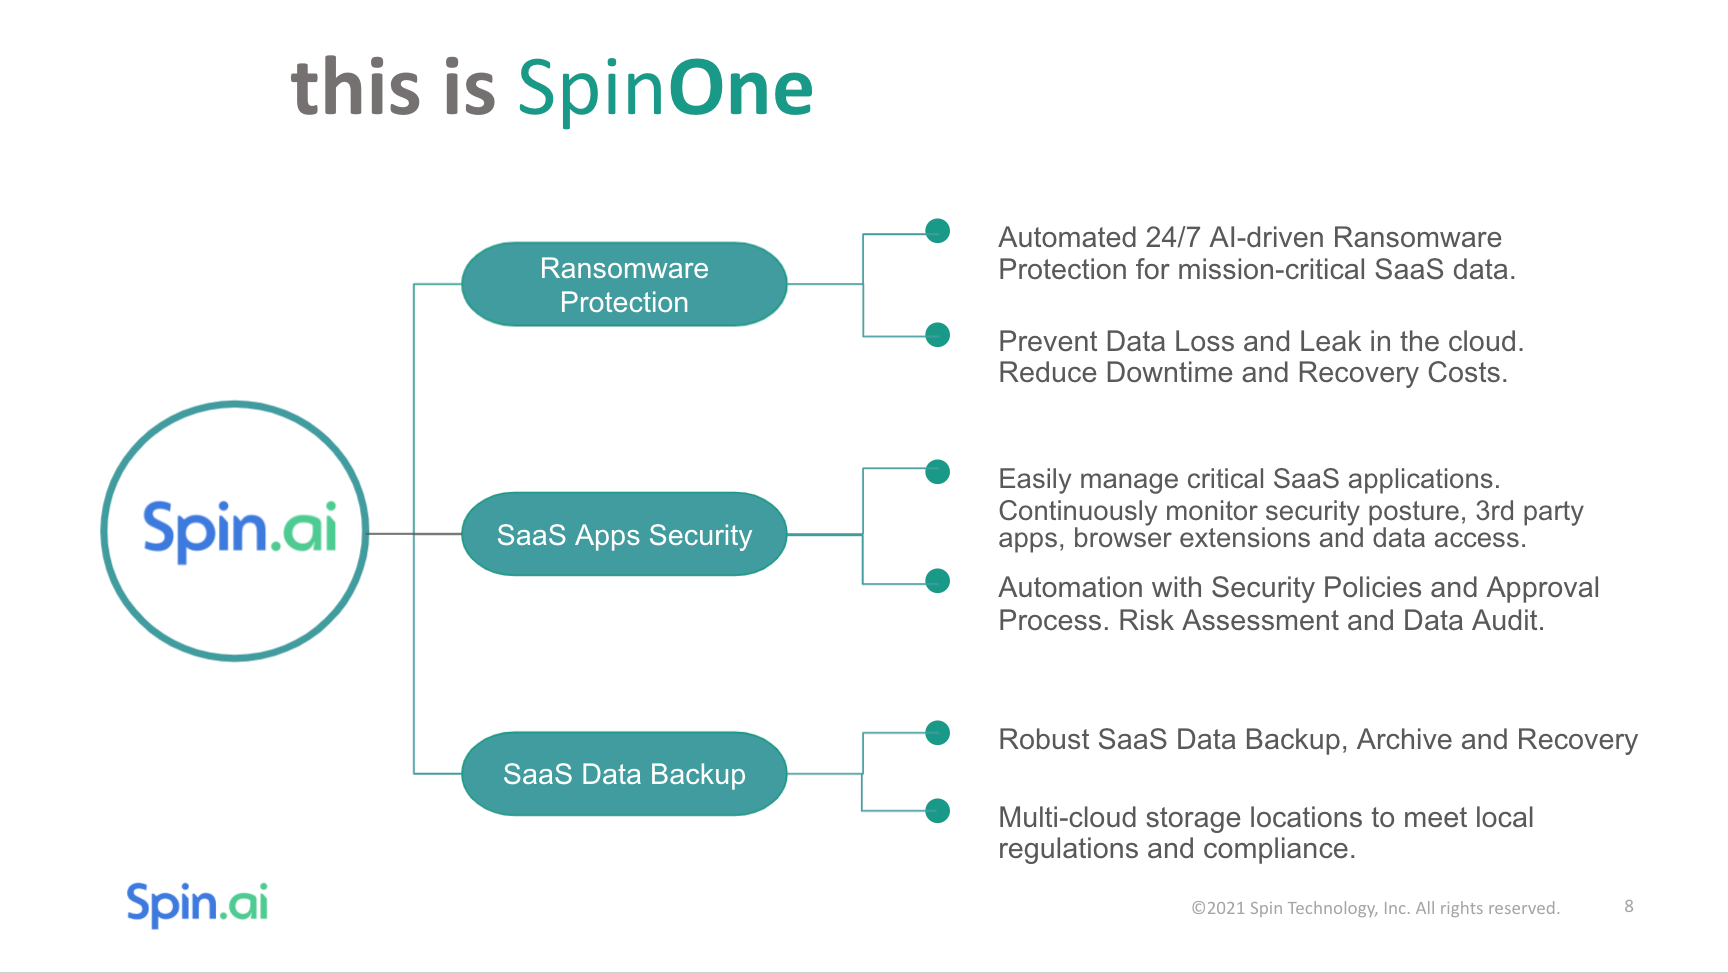 SpinOne – Centralized and Automated Cloud SaaS Security Platform